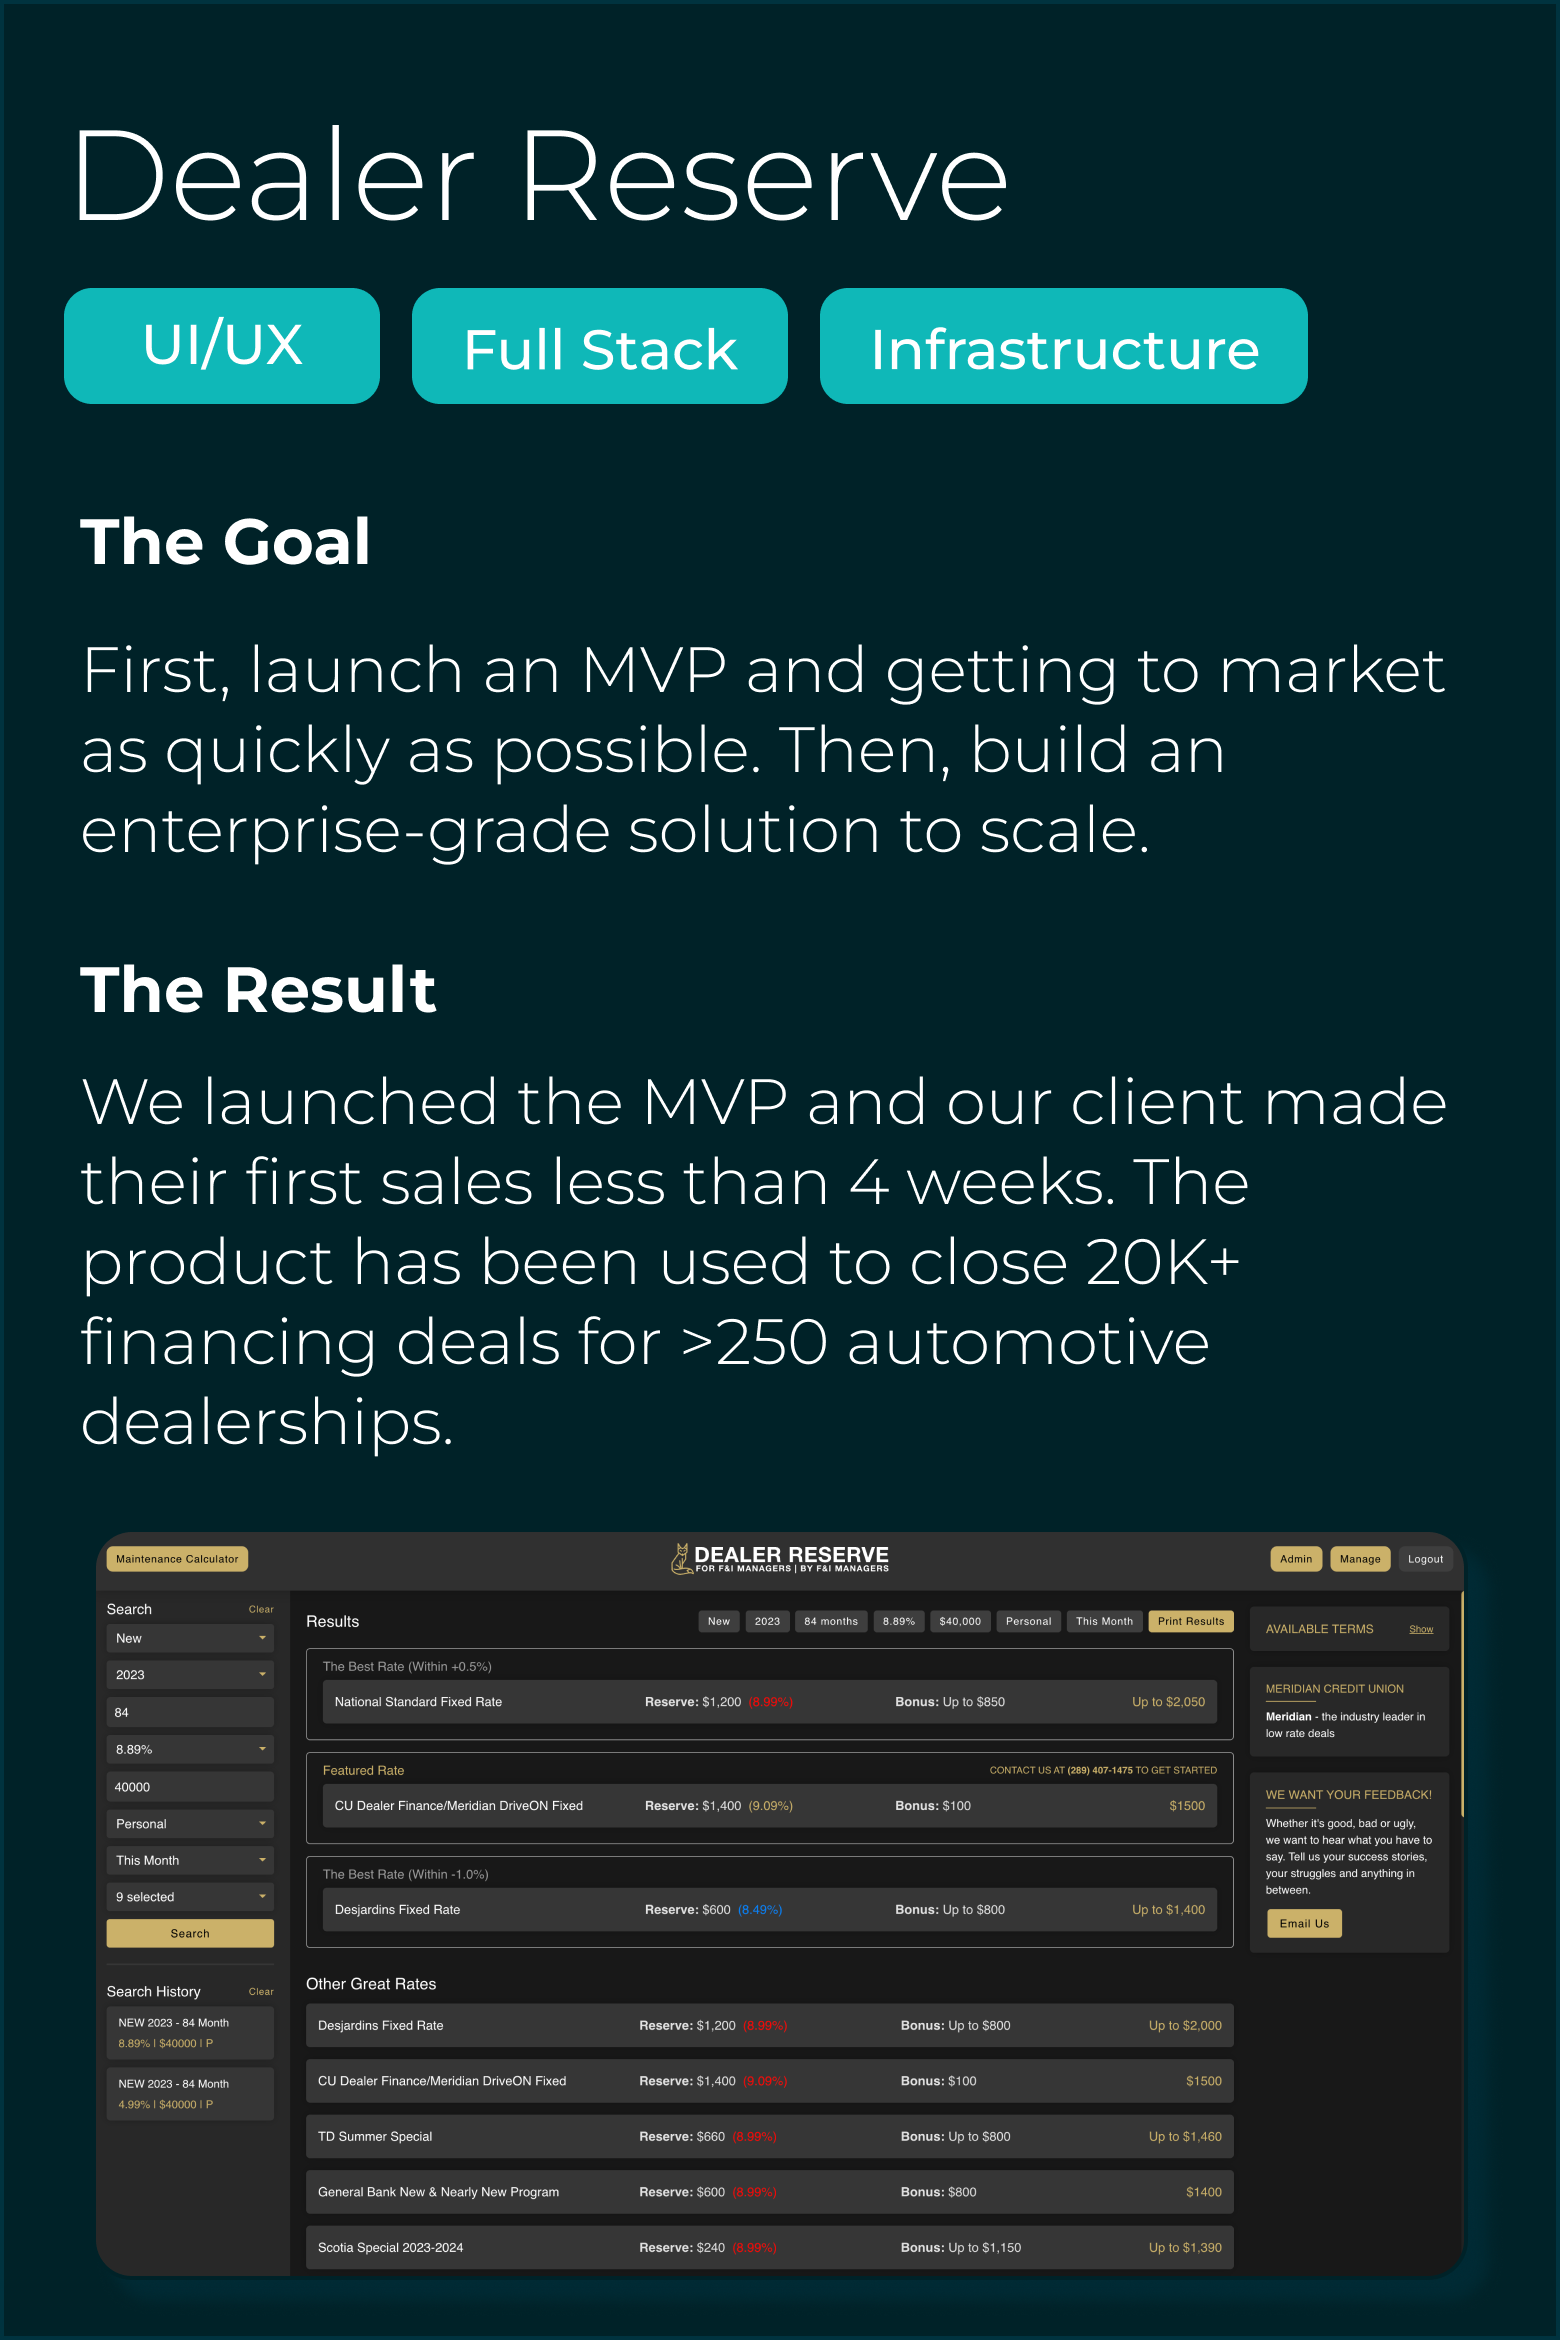 Image showing a Hilo Labs project and containing the text: Main Heading - Dealer Reserve Sub Heading - The Goal First, launch an MVP and getting to market as quickly as possible. Then, build an enterprise-grade solution to scale. Sub Heading - The Result We launched the MVP and our client made their first sale in less than 4 weeks. The product has been used to close 20K+ financing deals for >250 automotive dealerships.